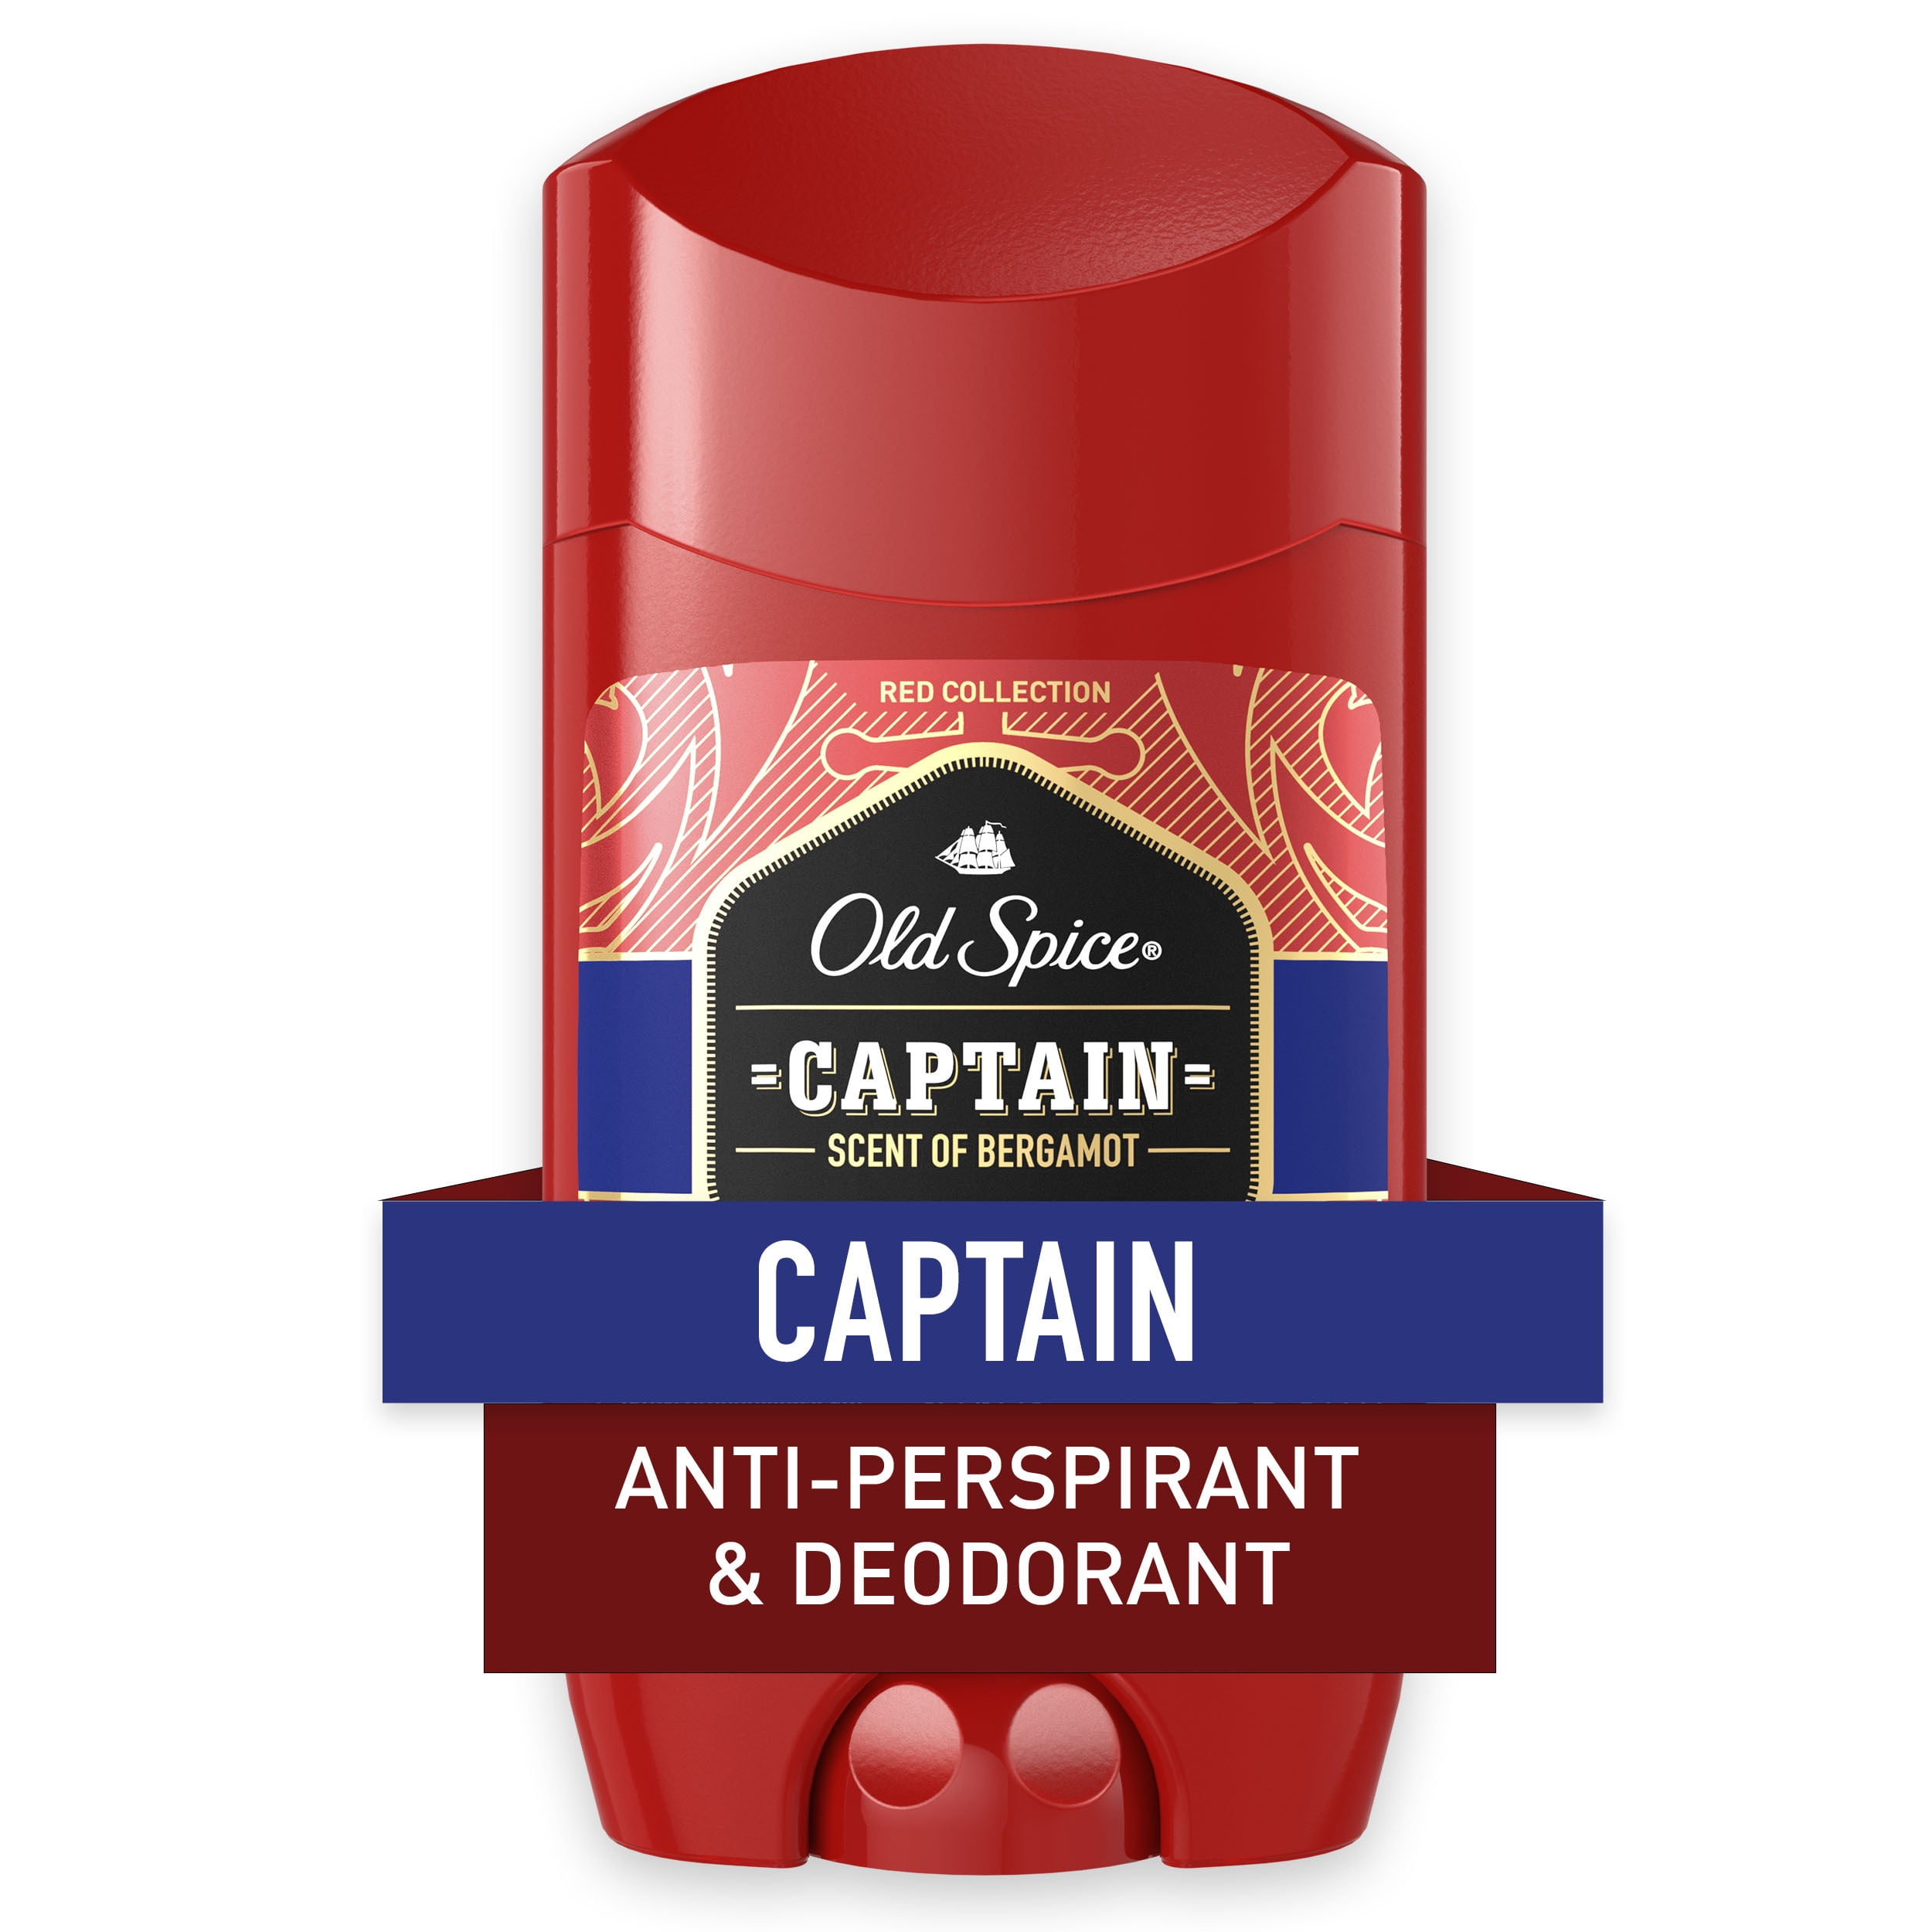 Old Spice Red Collection Antiperspirant Deodorant for Men, Captain Scent, 2.6 oz